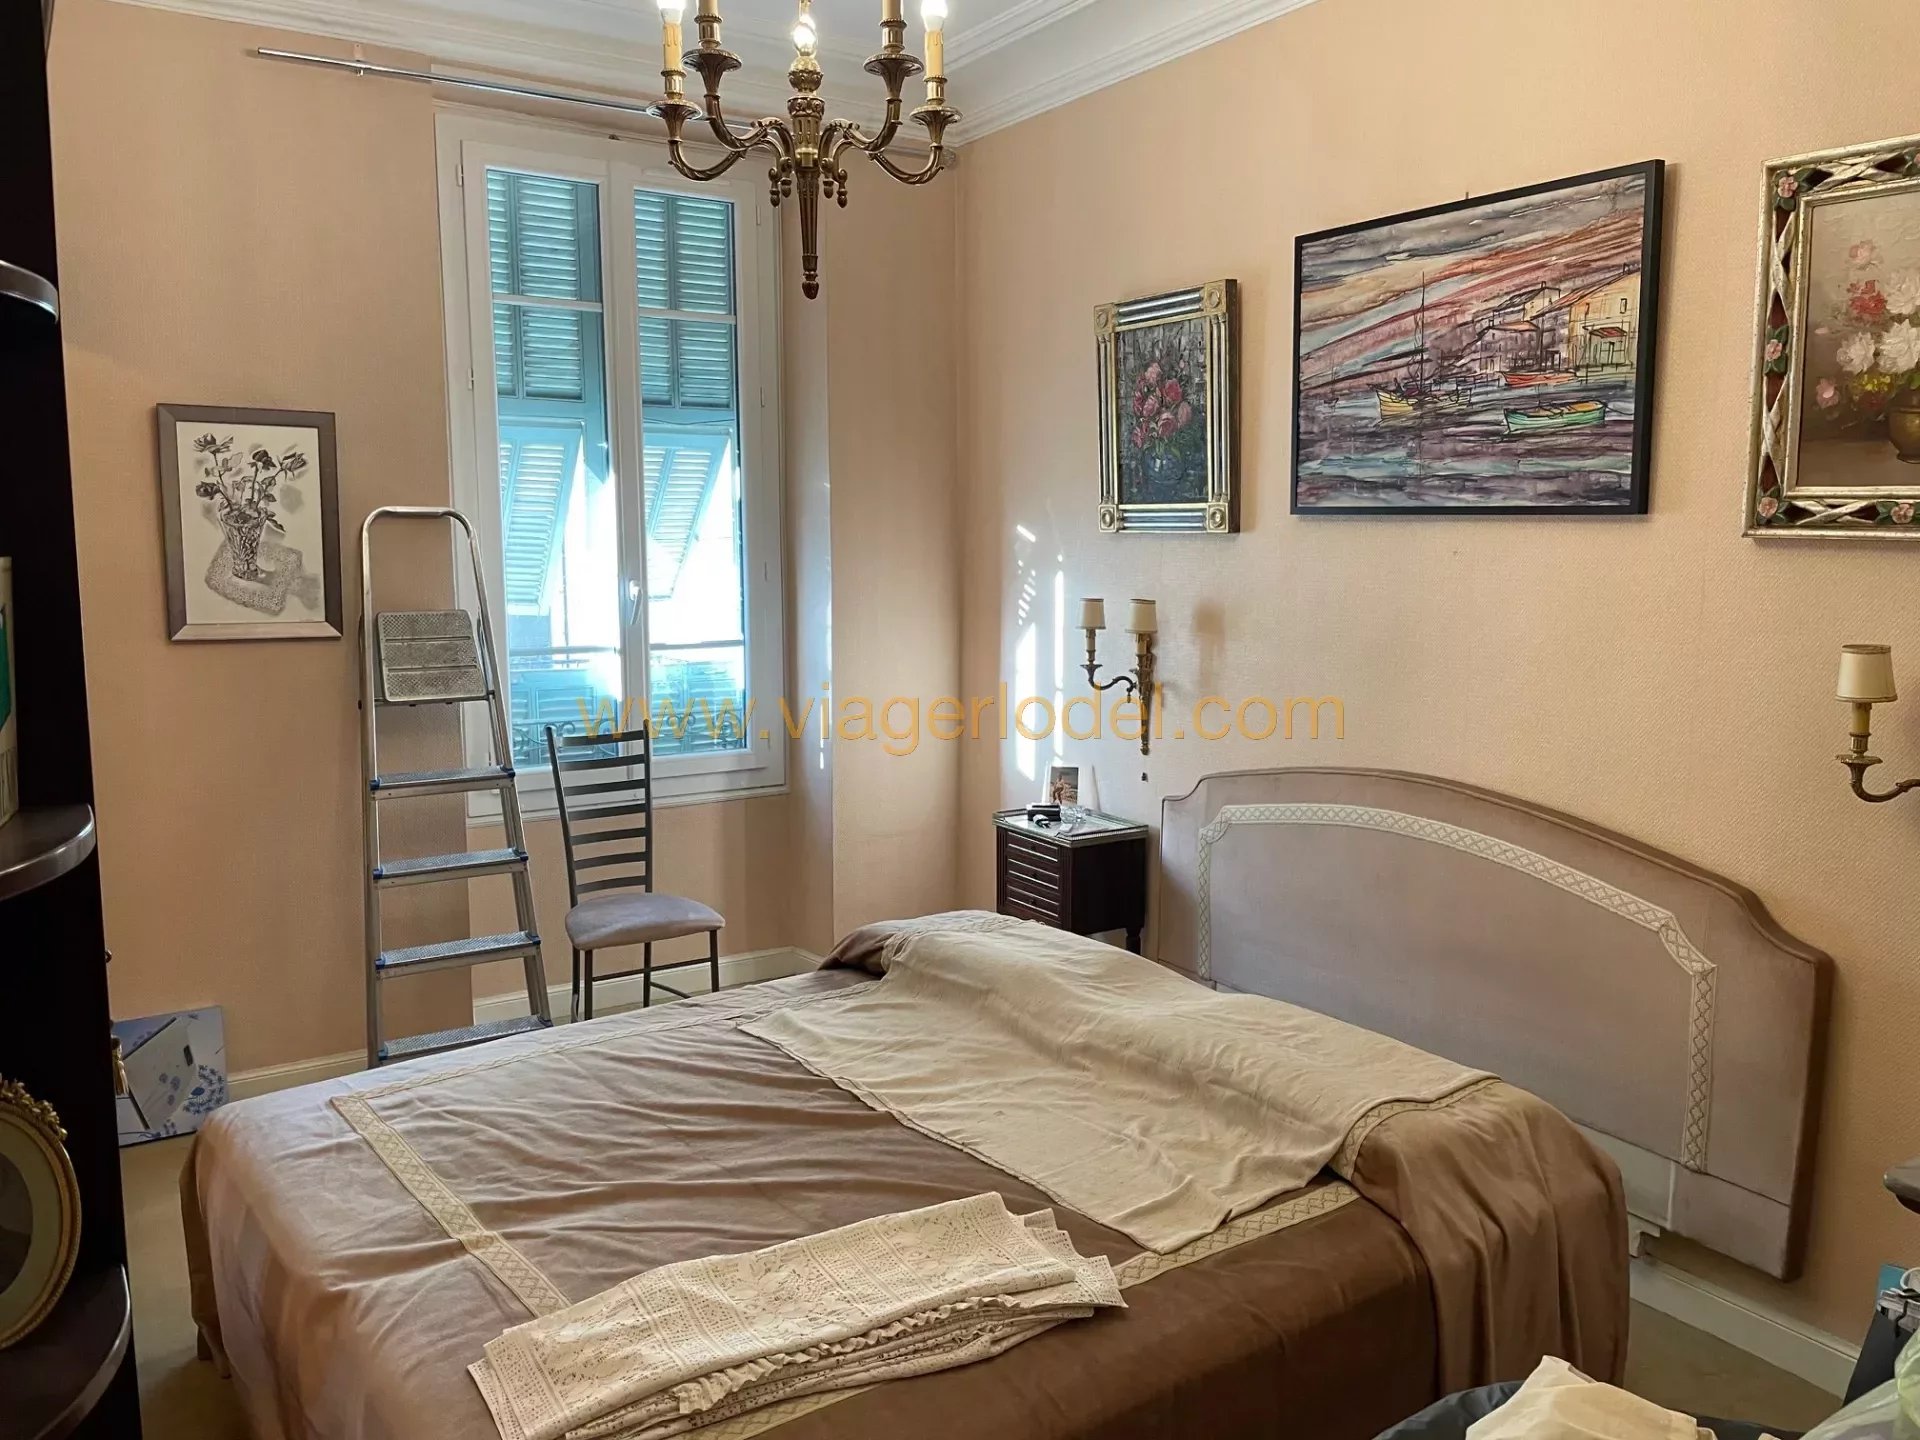 Réf. annonce : 9303 - VIAGER OCCUPE - NICE (06)